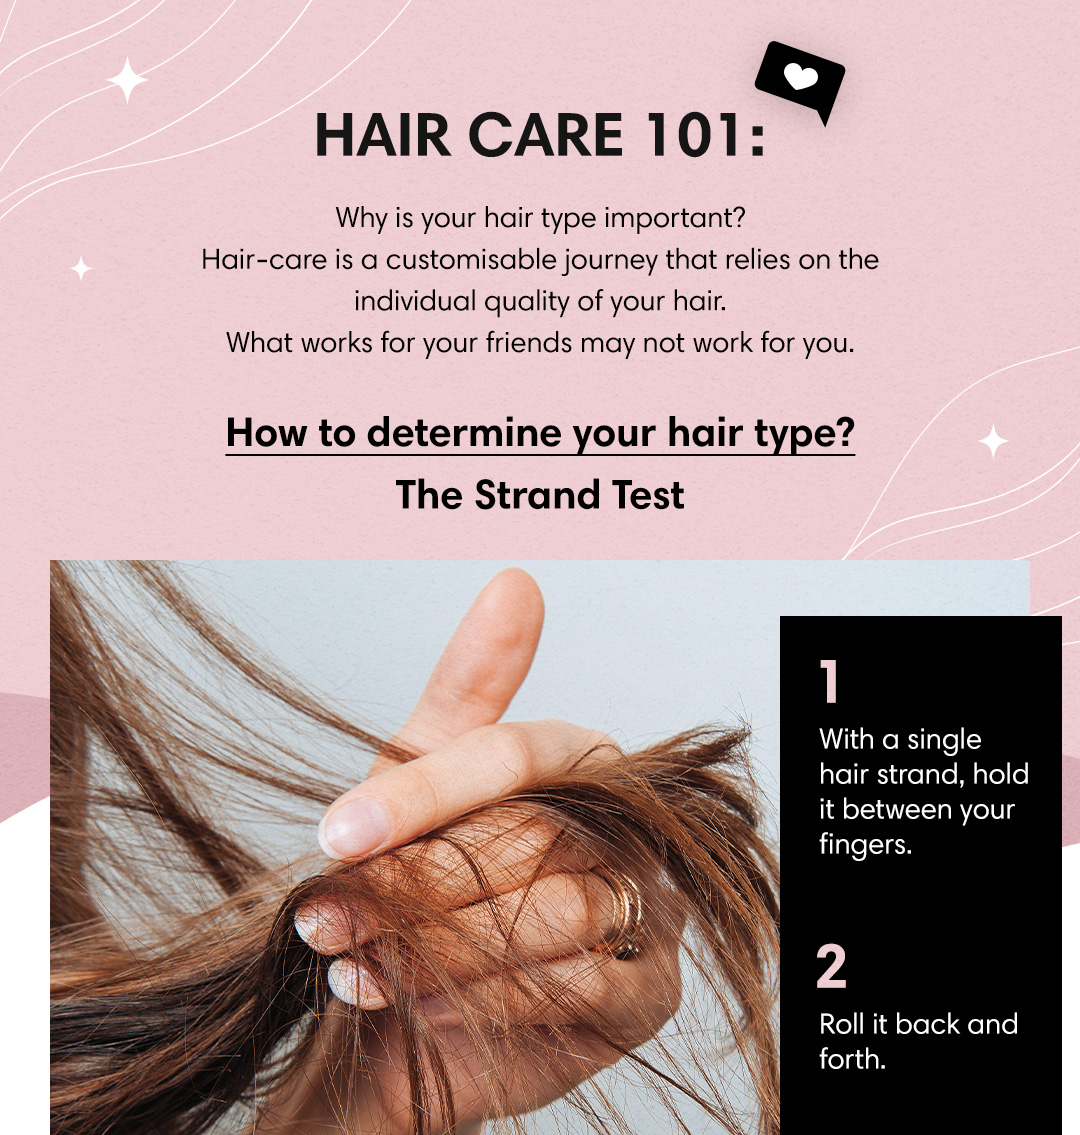 HAIR CARE 101:Q Why is your hair type important? Hair-care is a customisable journey that relies on the individual quality of your hair. What works for your friends may not work for you. How to determine your hair type? The Strand Test 1 With a single hair strand, hold it between your fingers. p Roll it back and forth. 